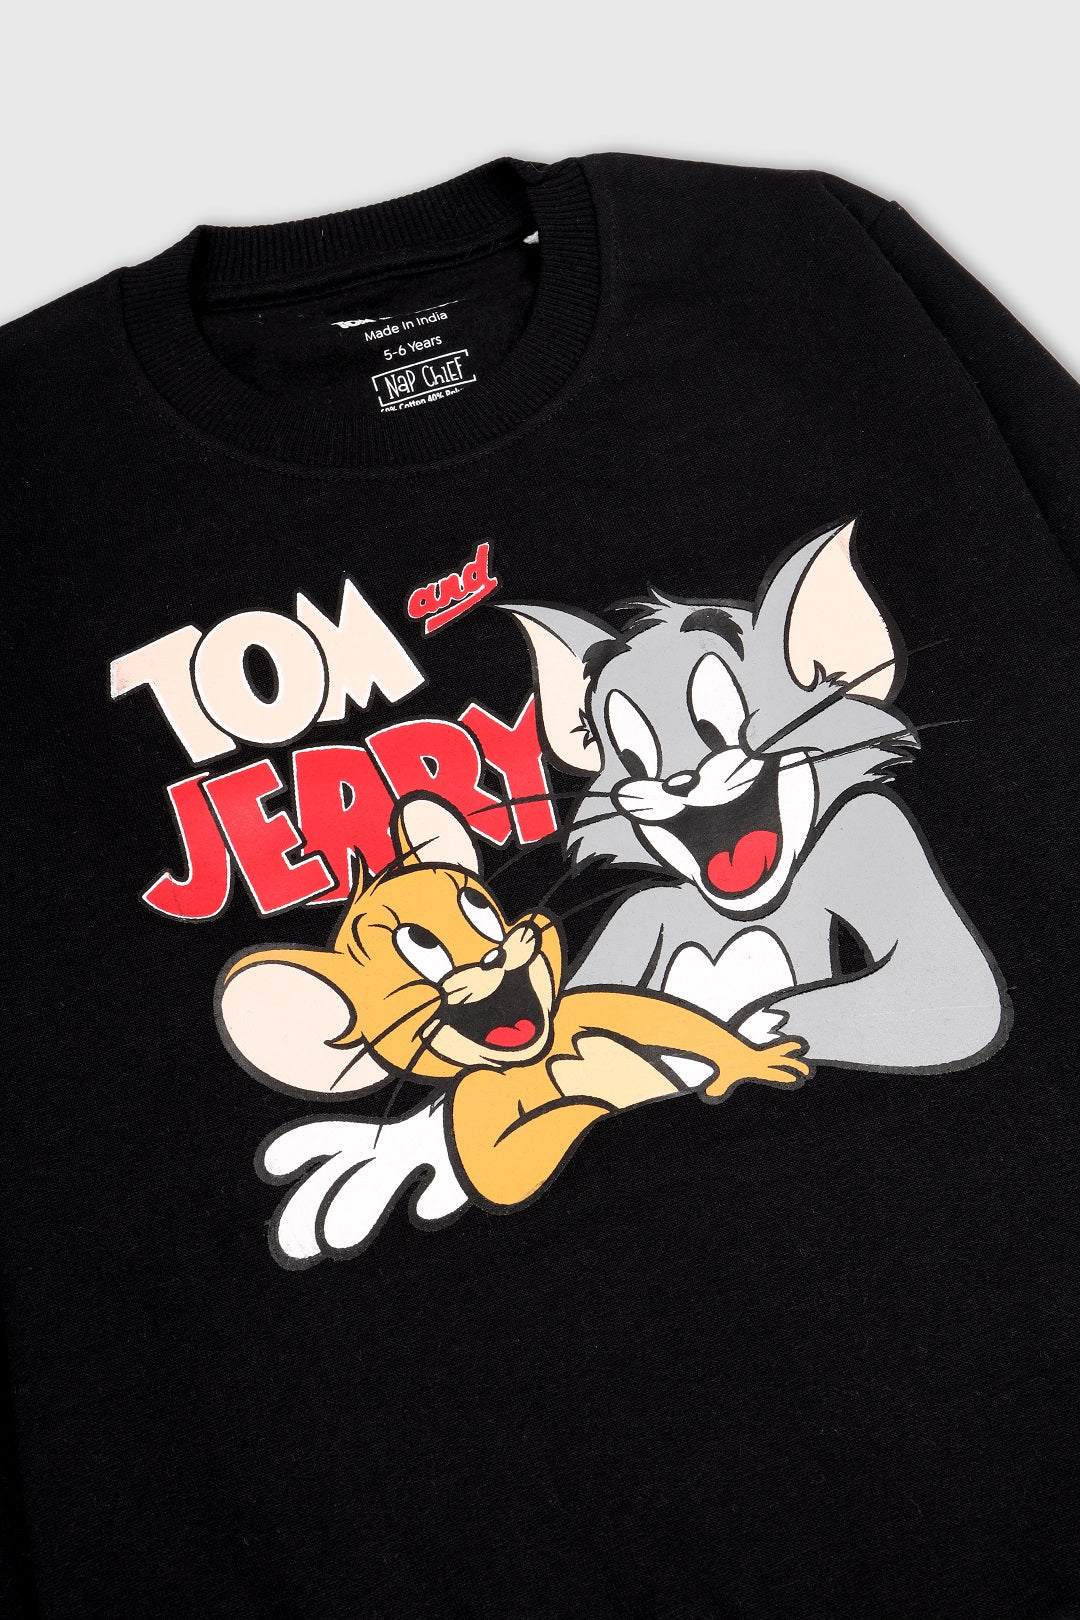 Tom & Jerry Double Trouble Co-Ord set